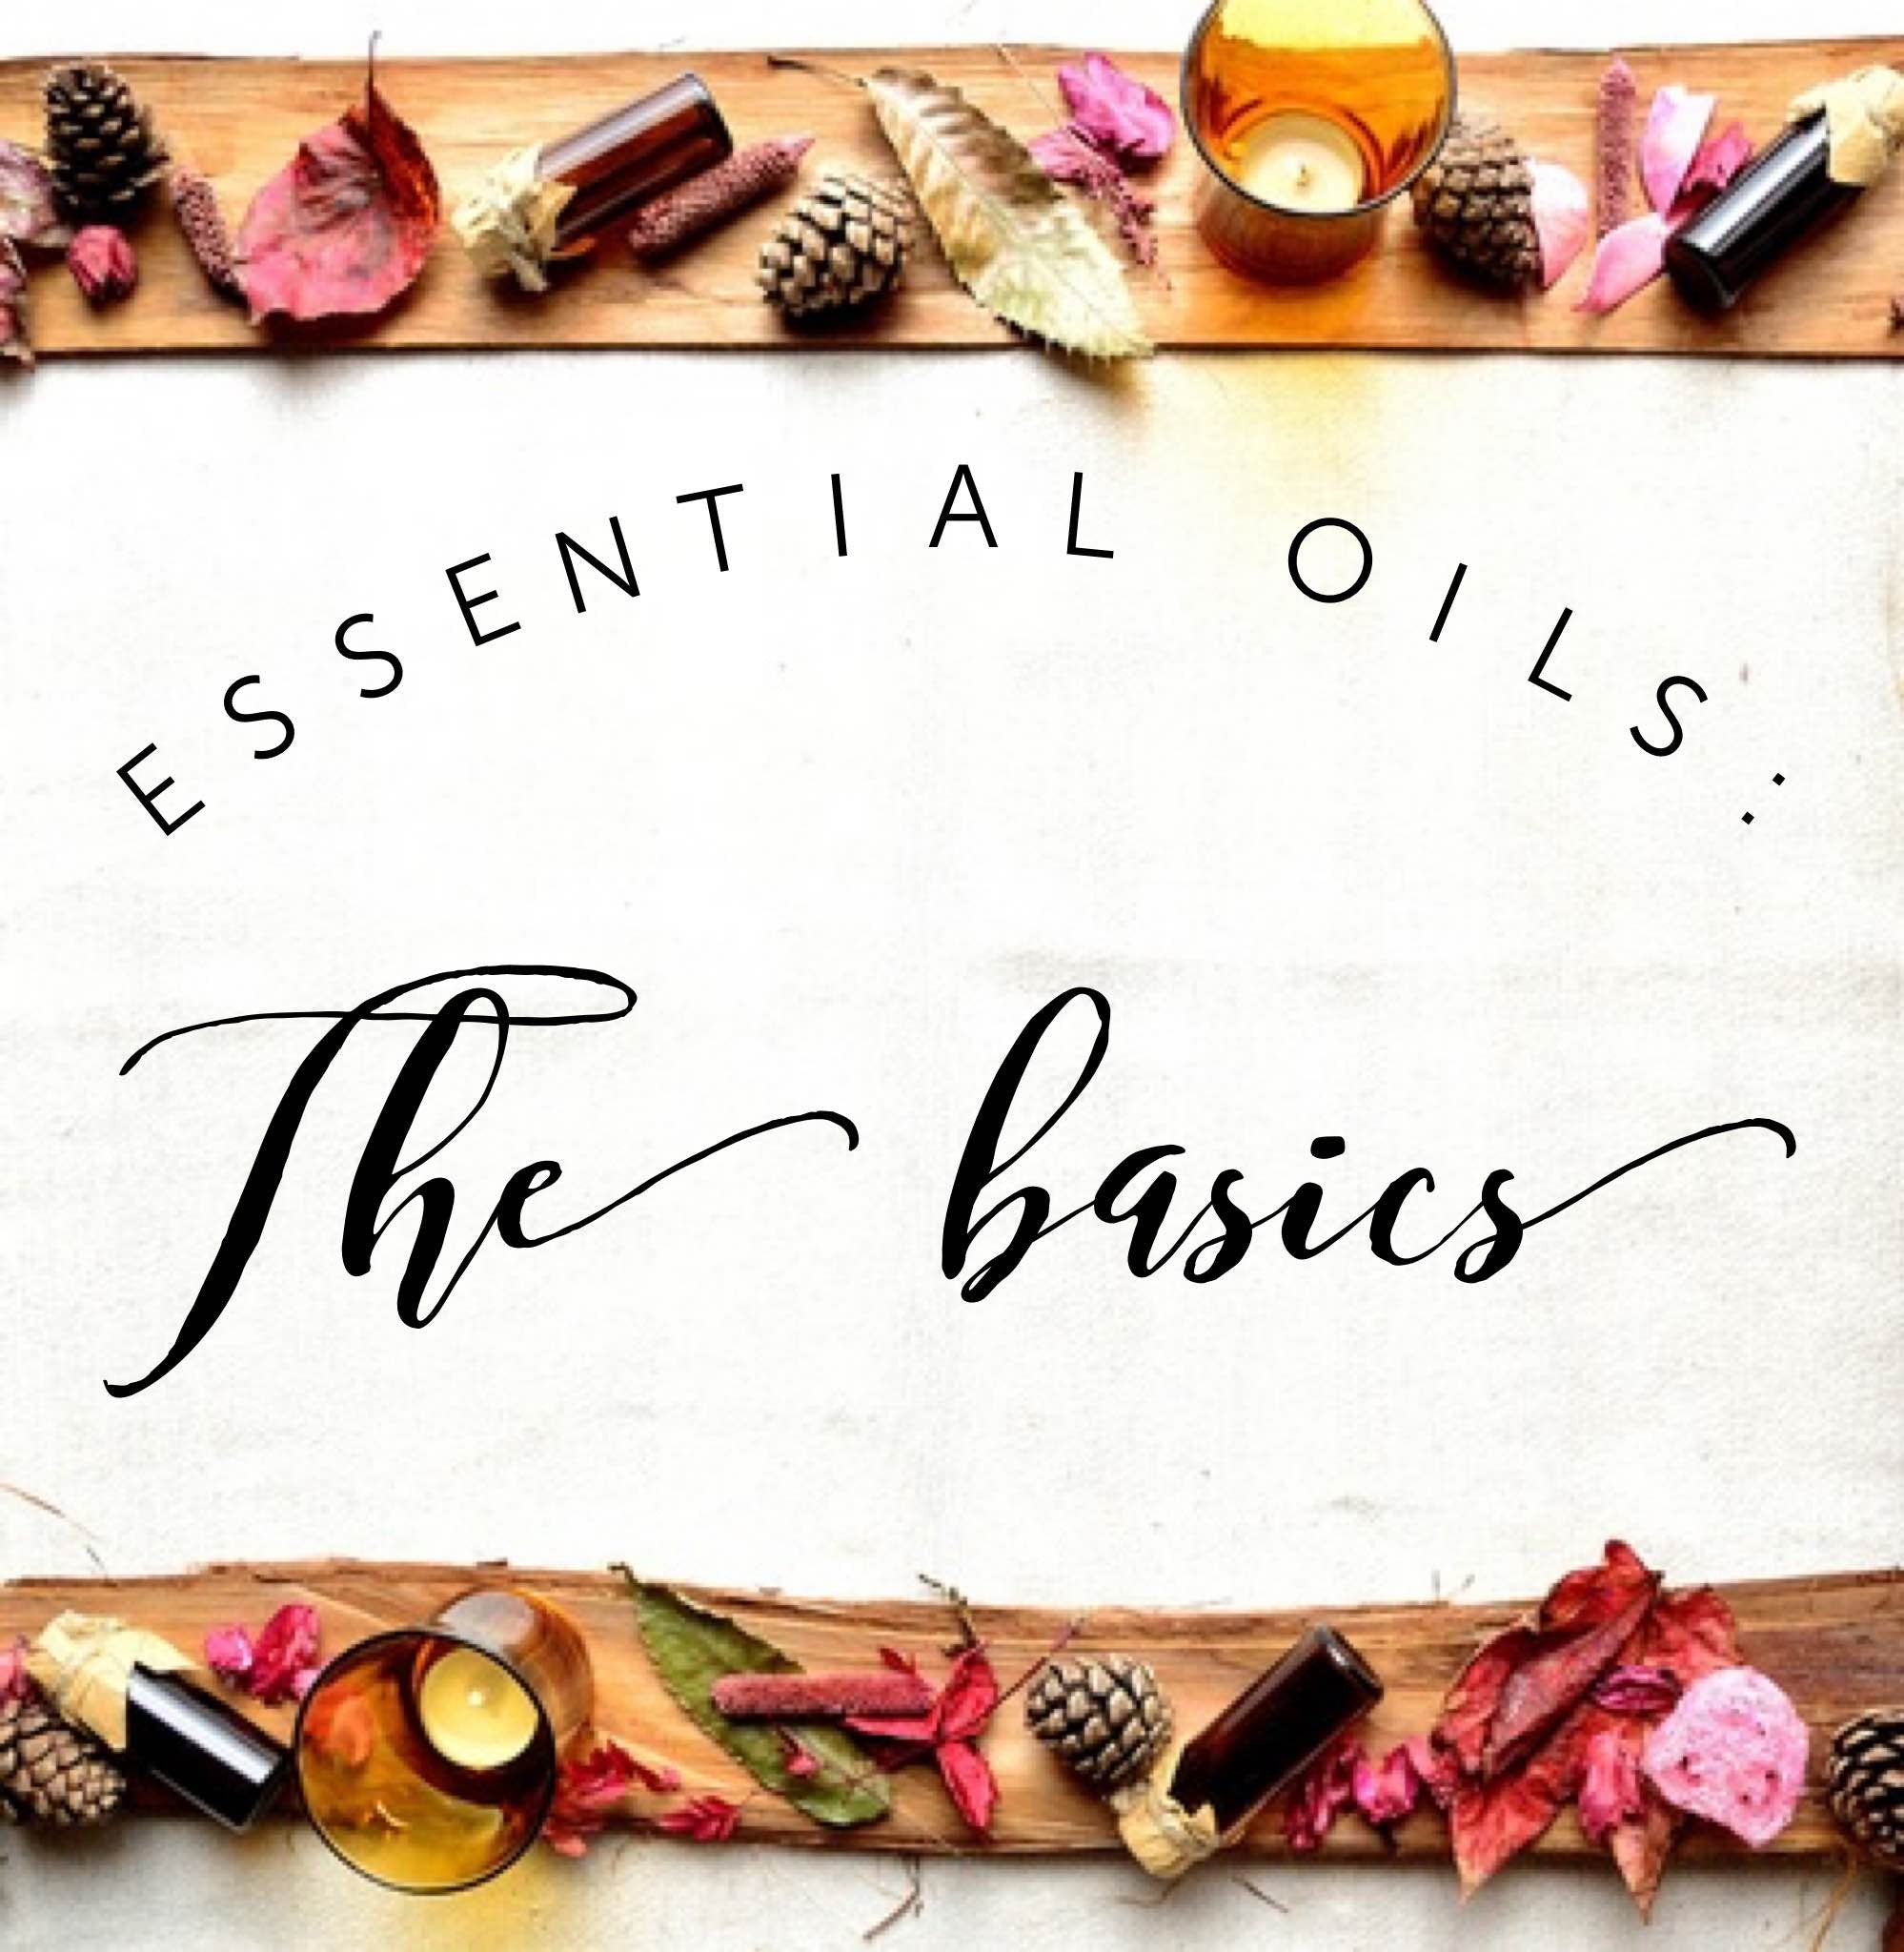 New to Essential Oils? Start here with our TOP 3 must haves....!